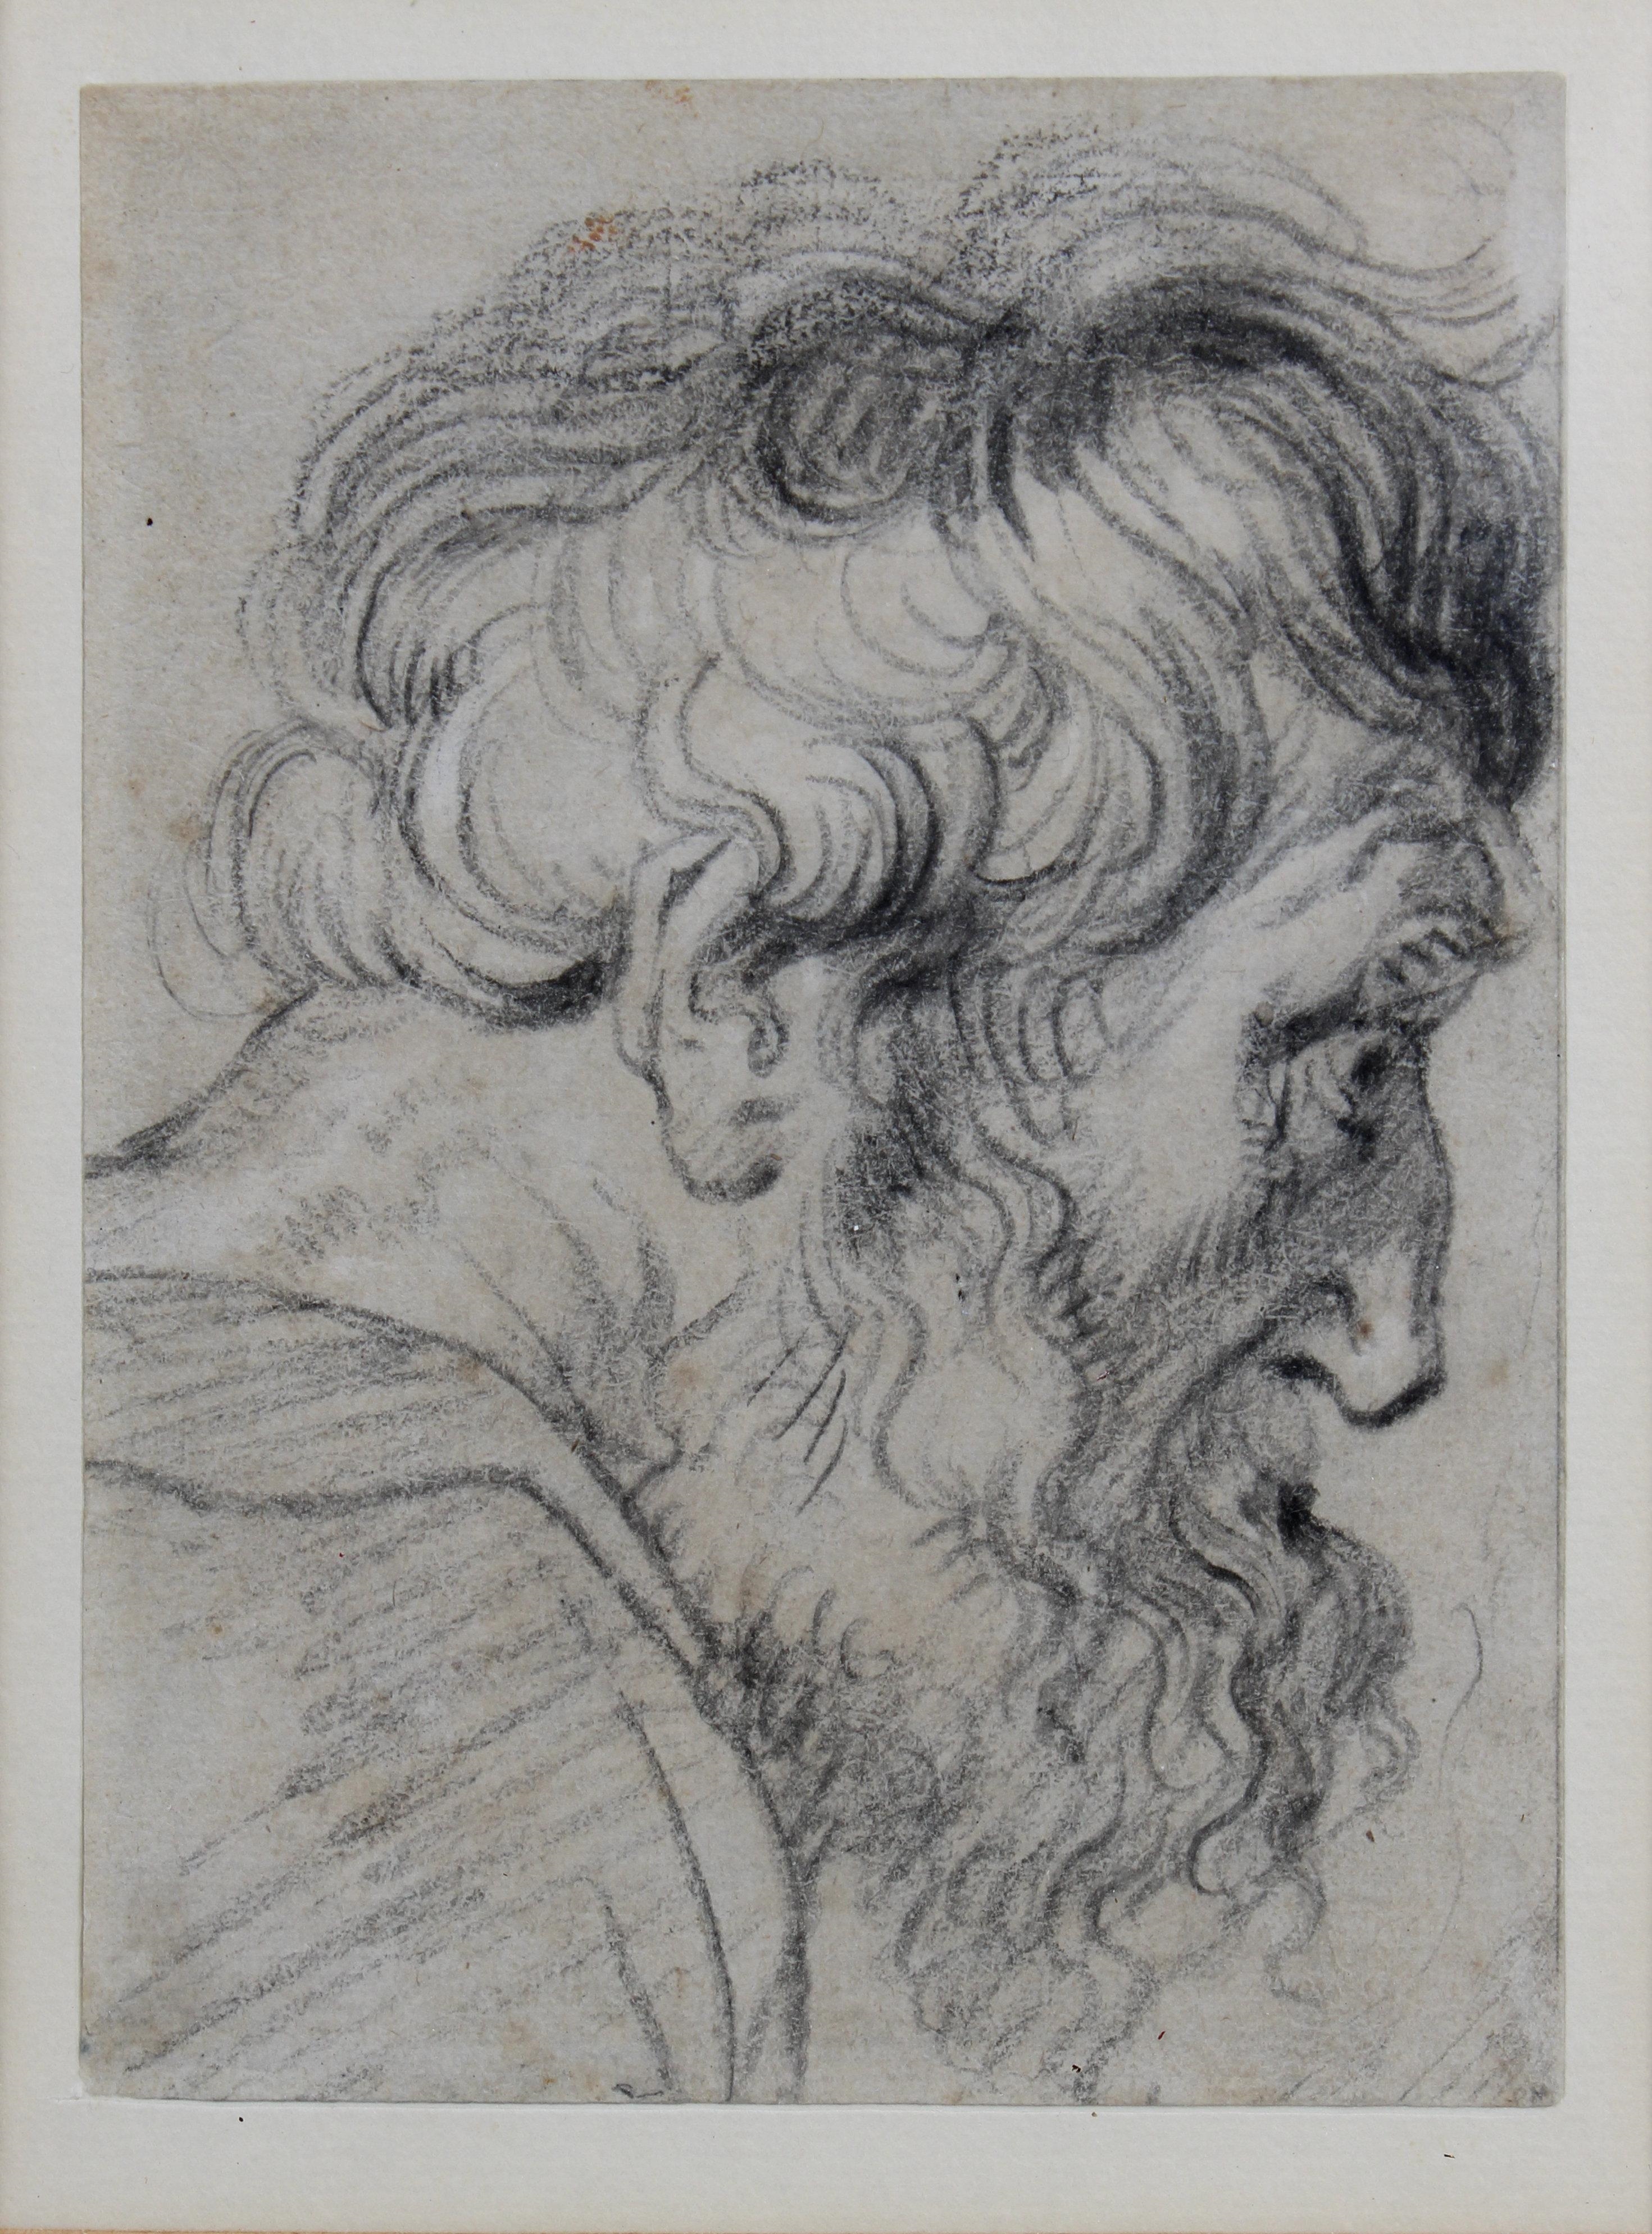 Artwork by Peter Paul Rubens, Four drawings of heads of bearded men, Made of sanguine and black chalk on laid paper